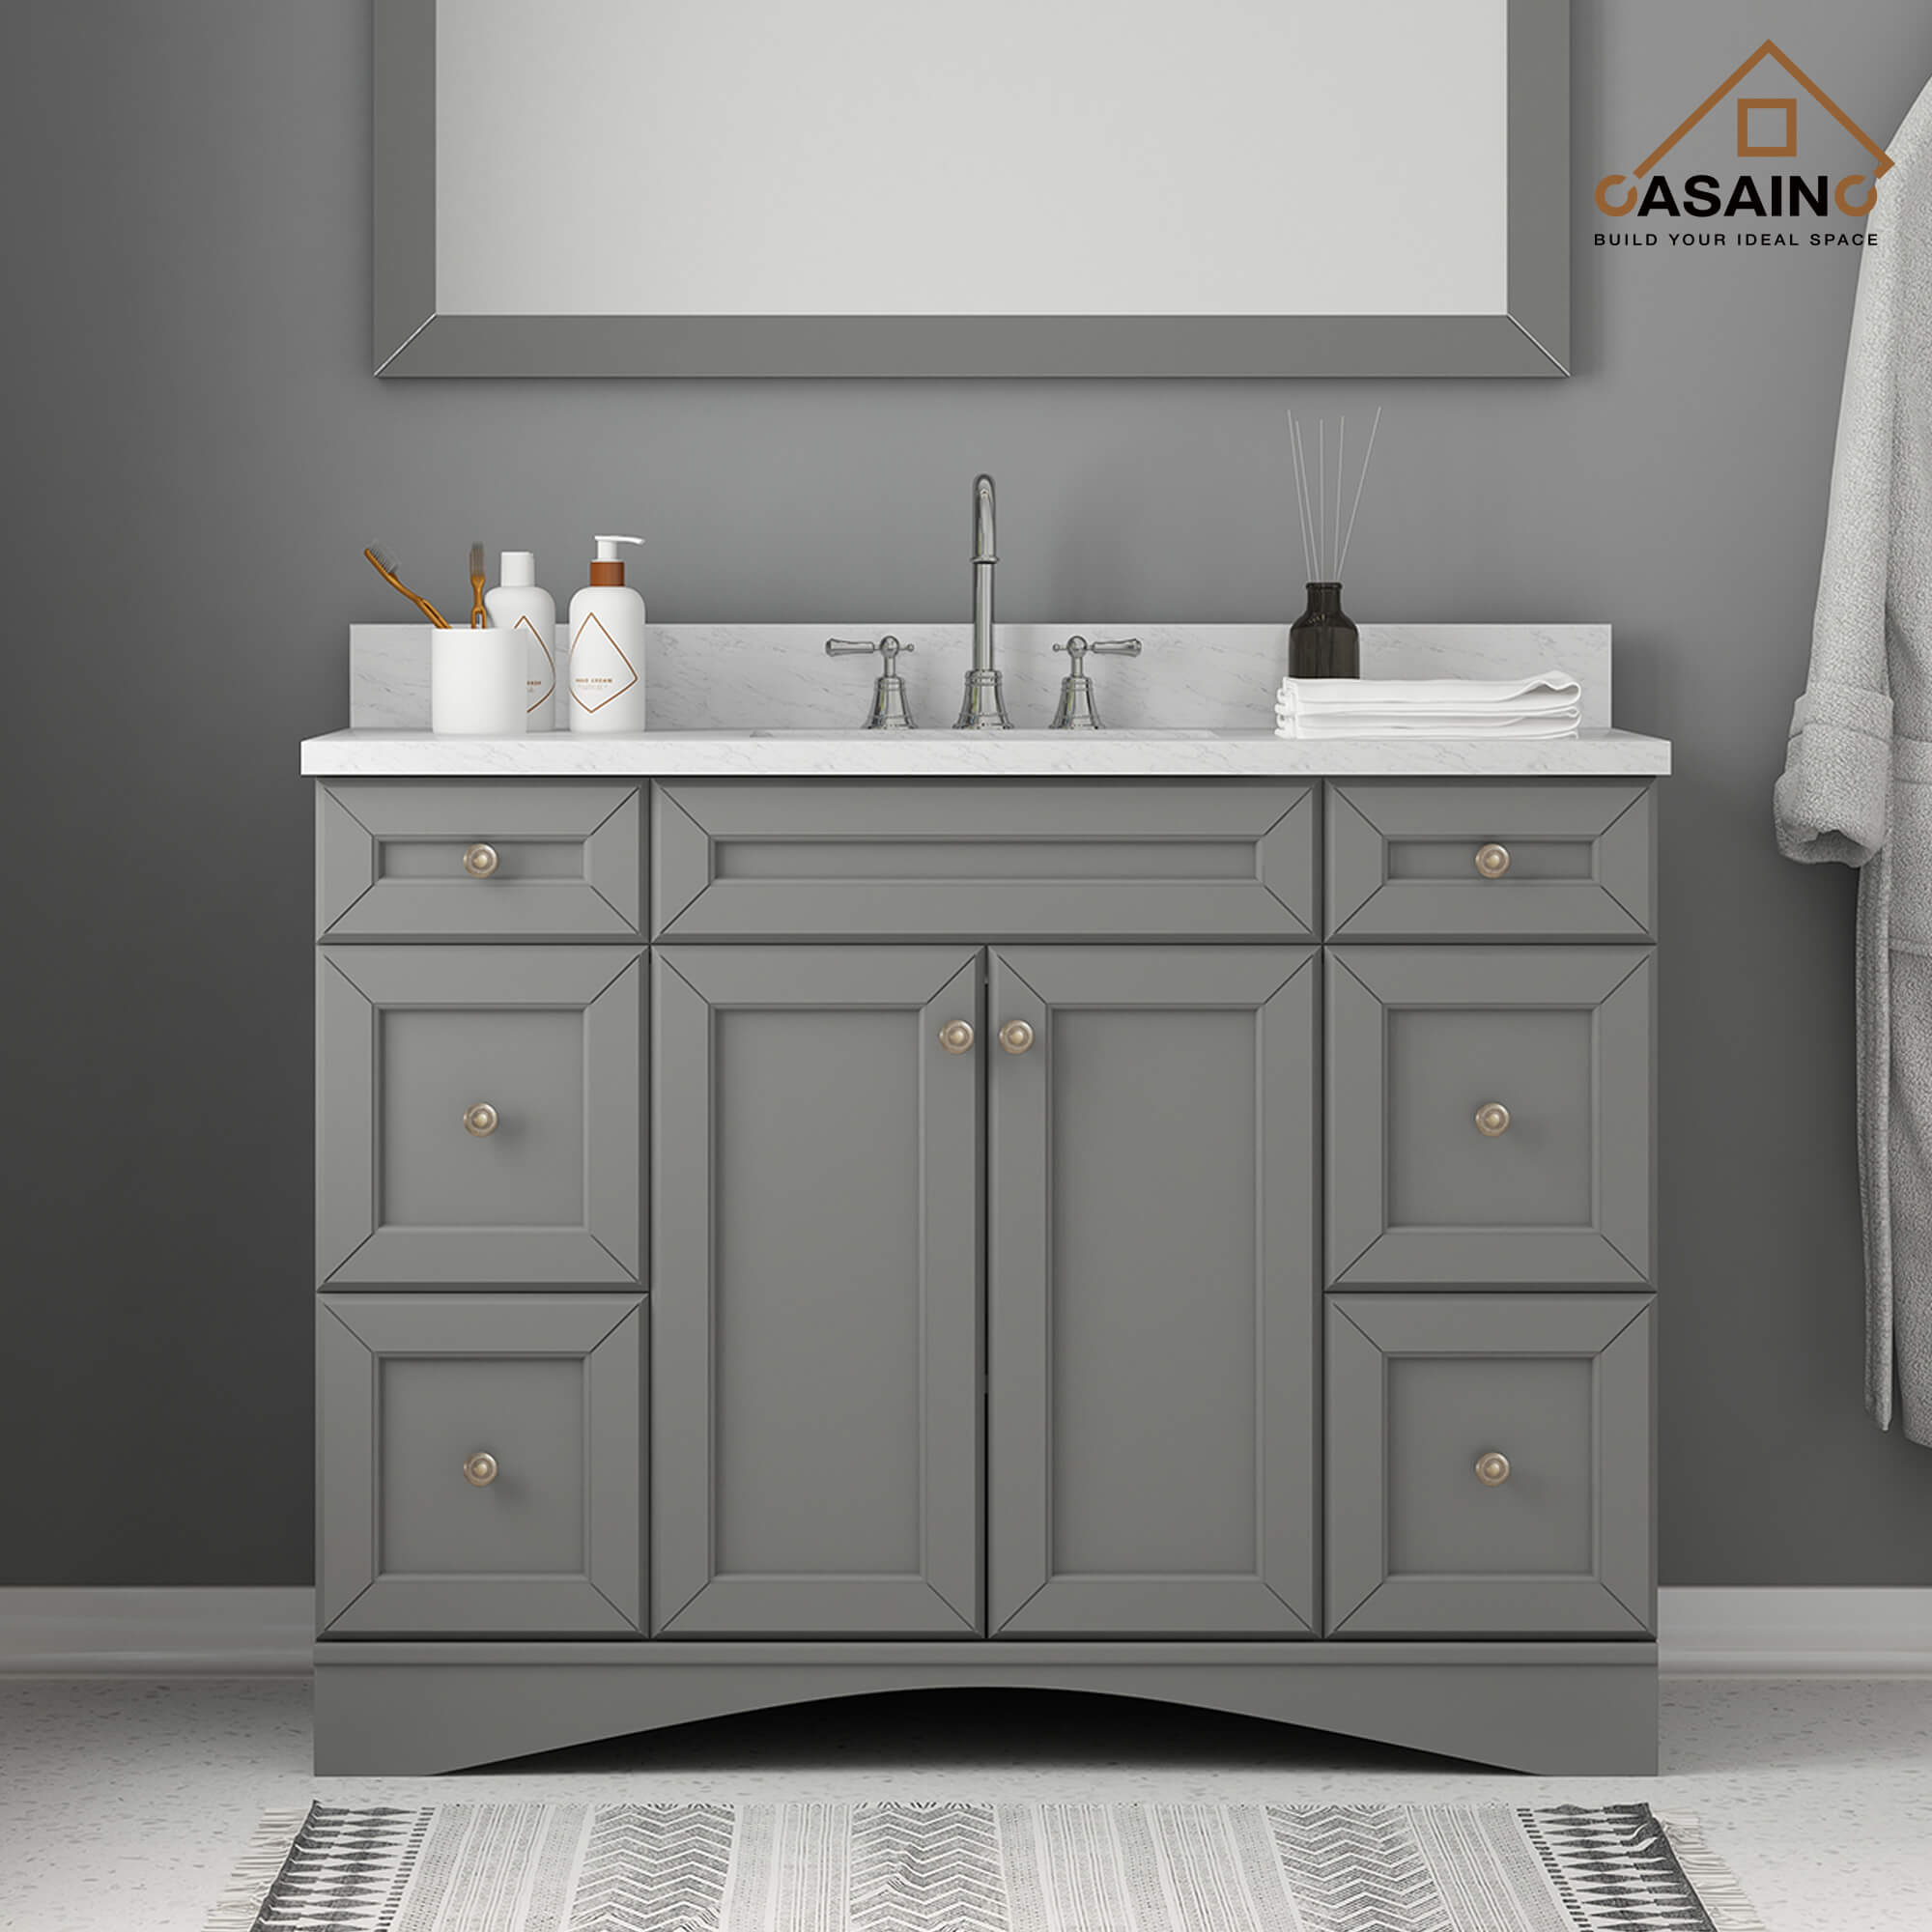 CASAINC 48 x 22 x 35.4 in. Solid Wood Bath Vanity with Marble Top and Backsplash in Gray/White (No/With Mirror)